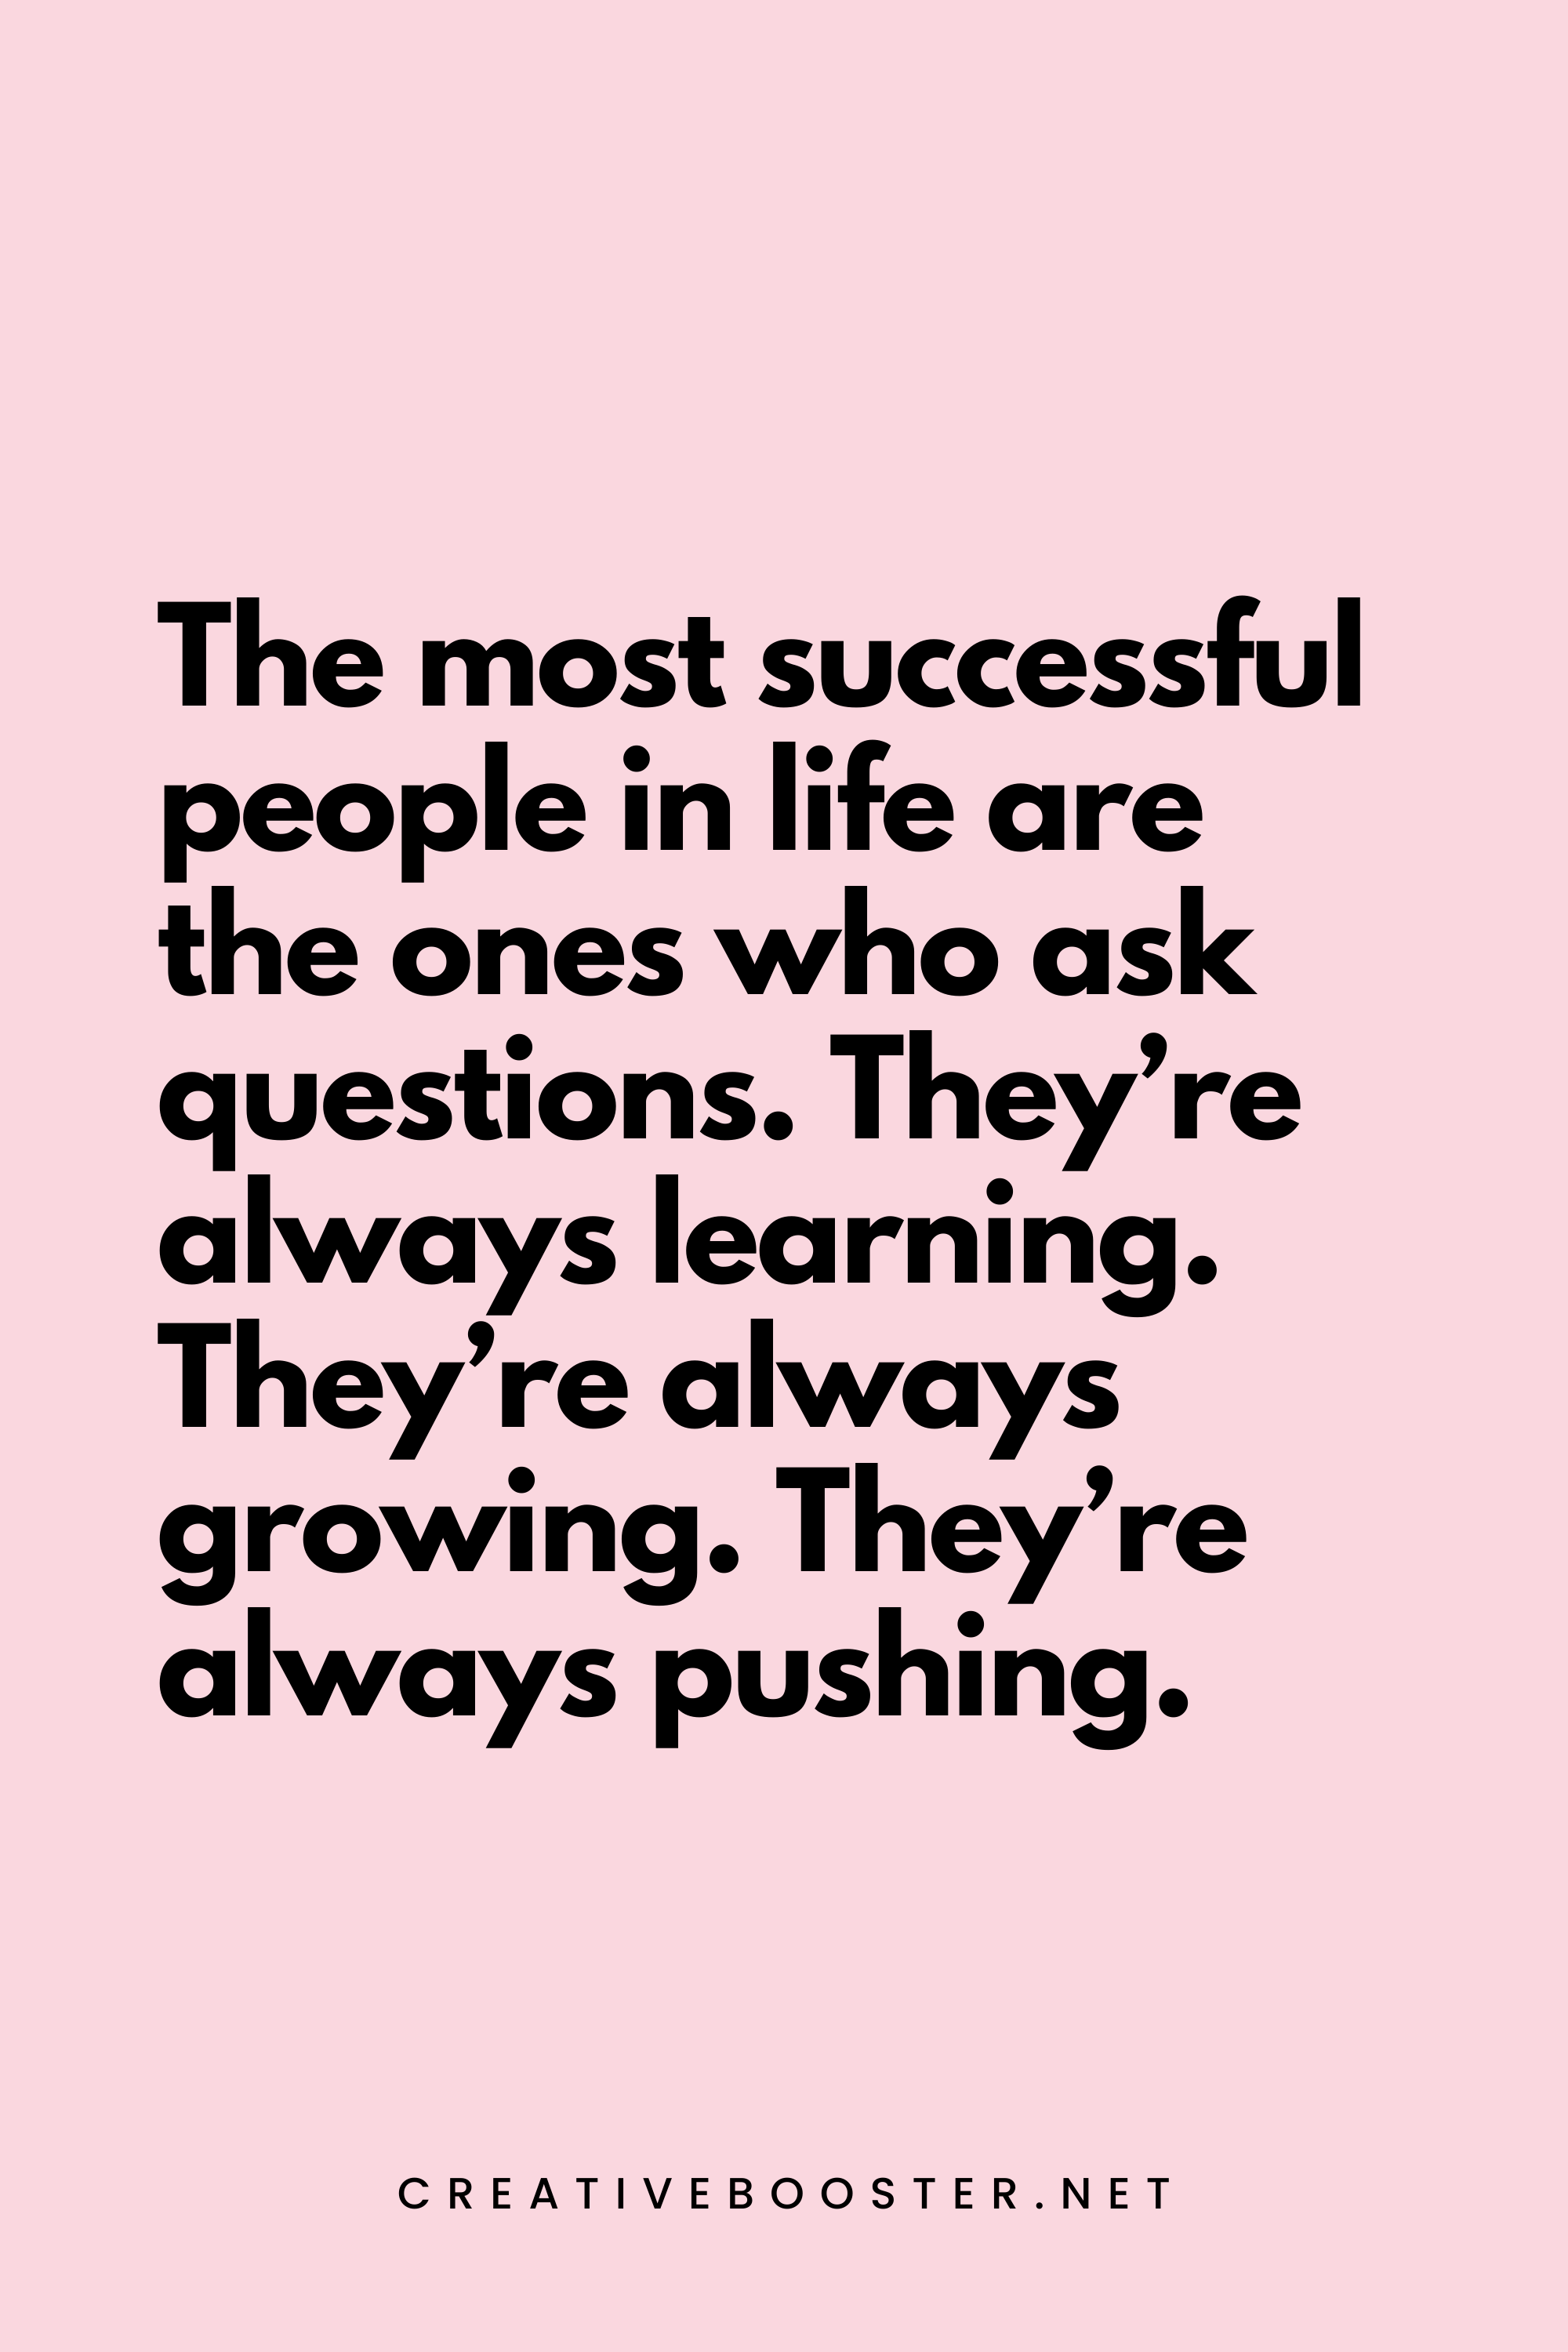 69. The most successful people in life are the ones who ask questions. They’re always learning. They’re always growing. They’re always pushing. - Robert Kiyosaki - 7. Financial Freedom Quotes by Robert Kiyosaki